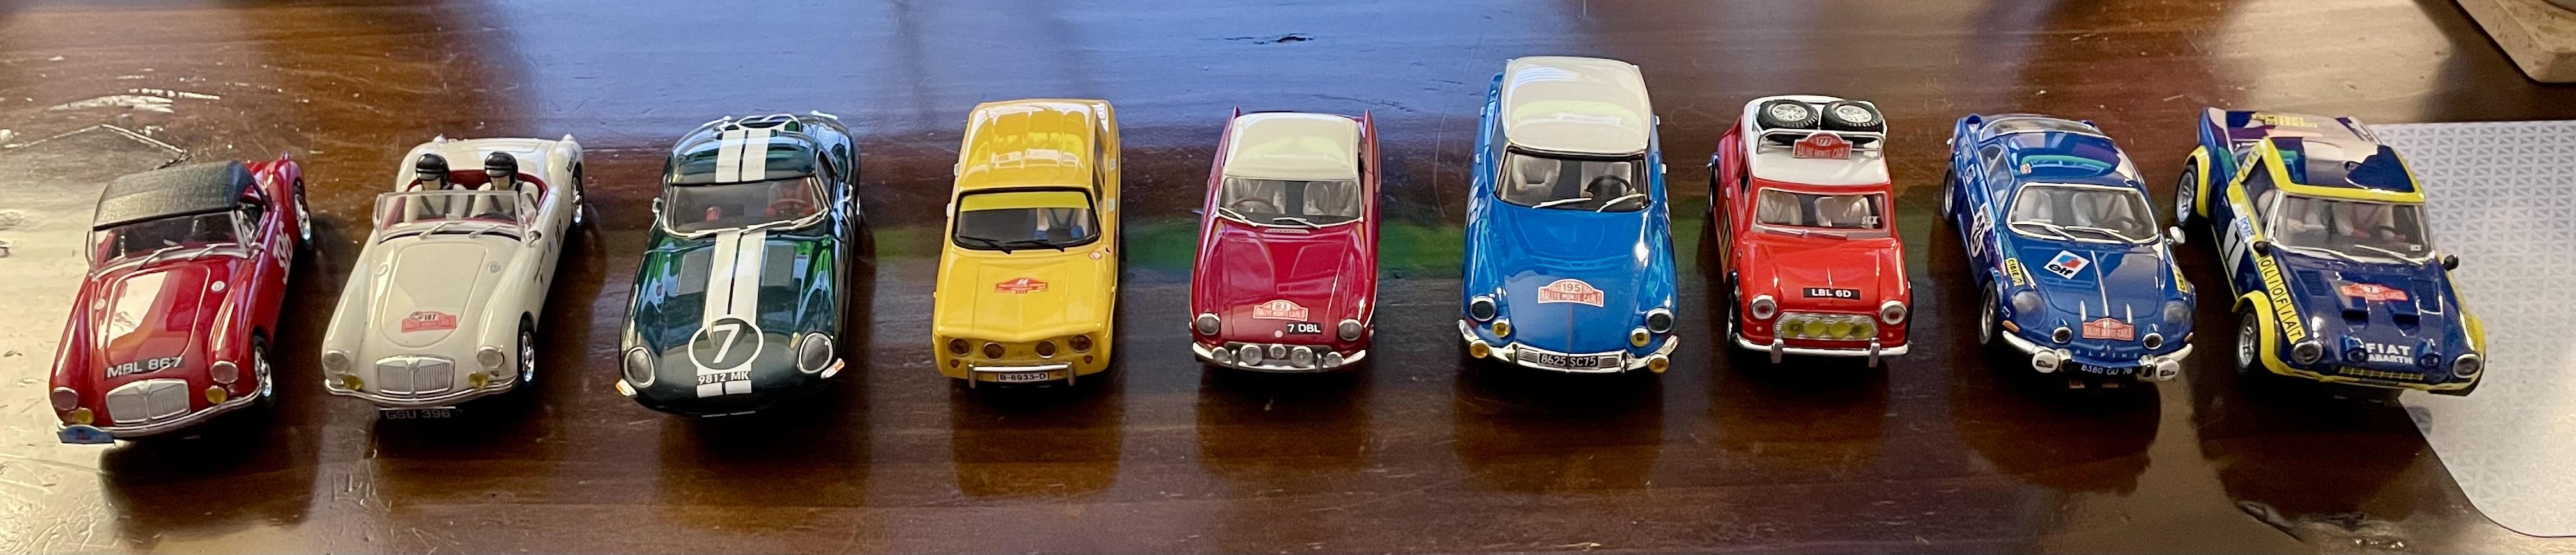 1961 to 1971 rally cars in my collection